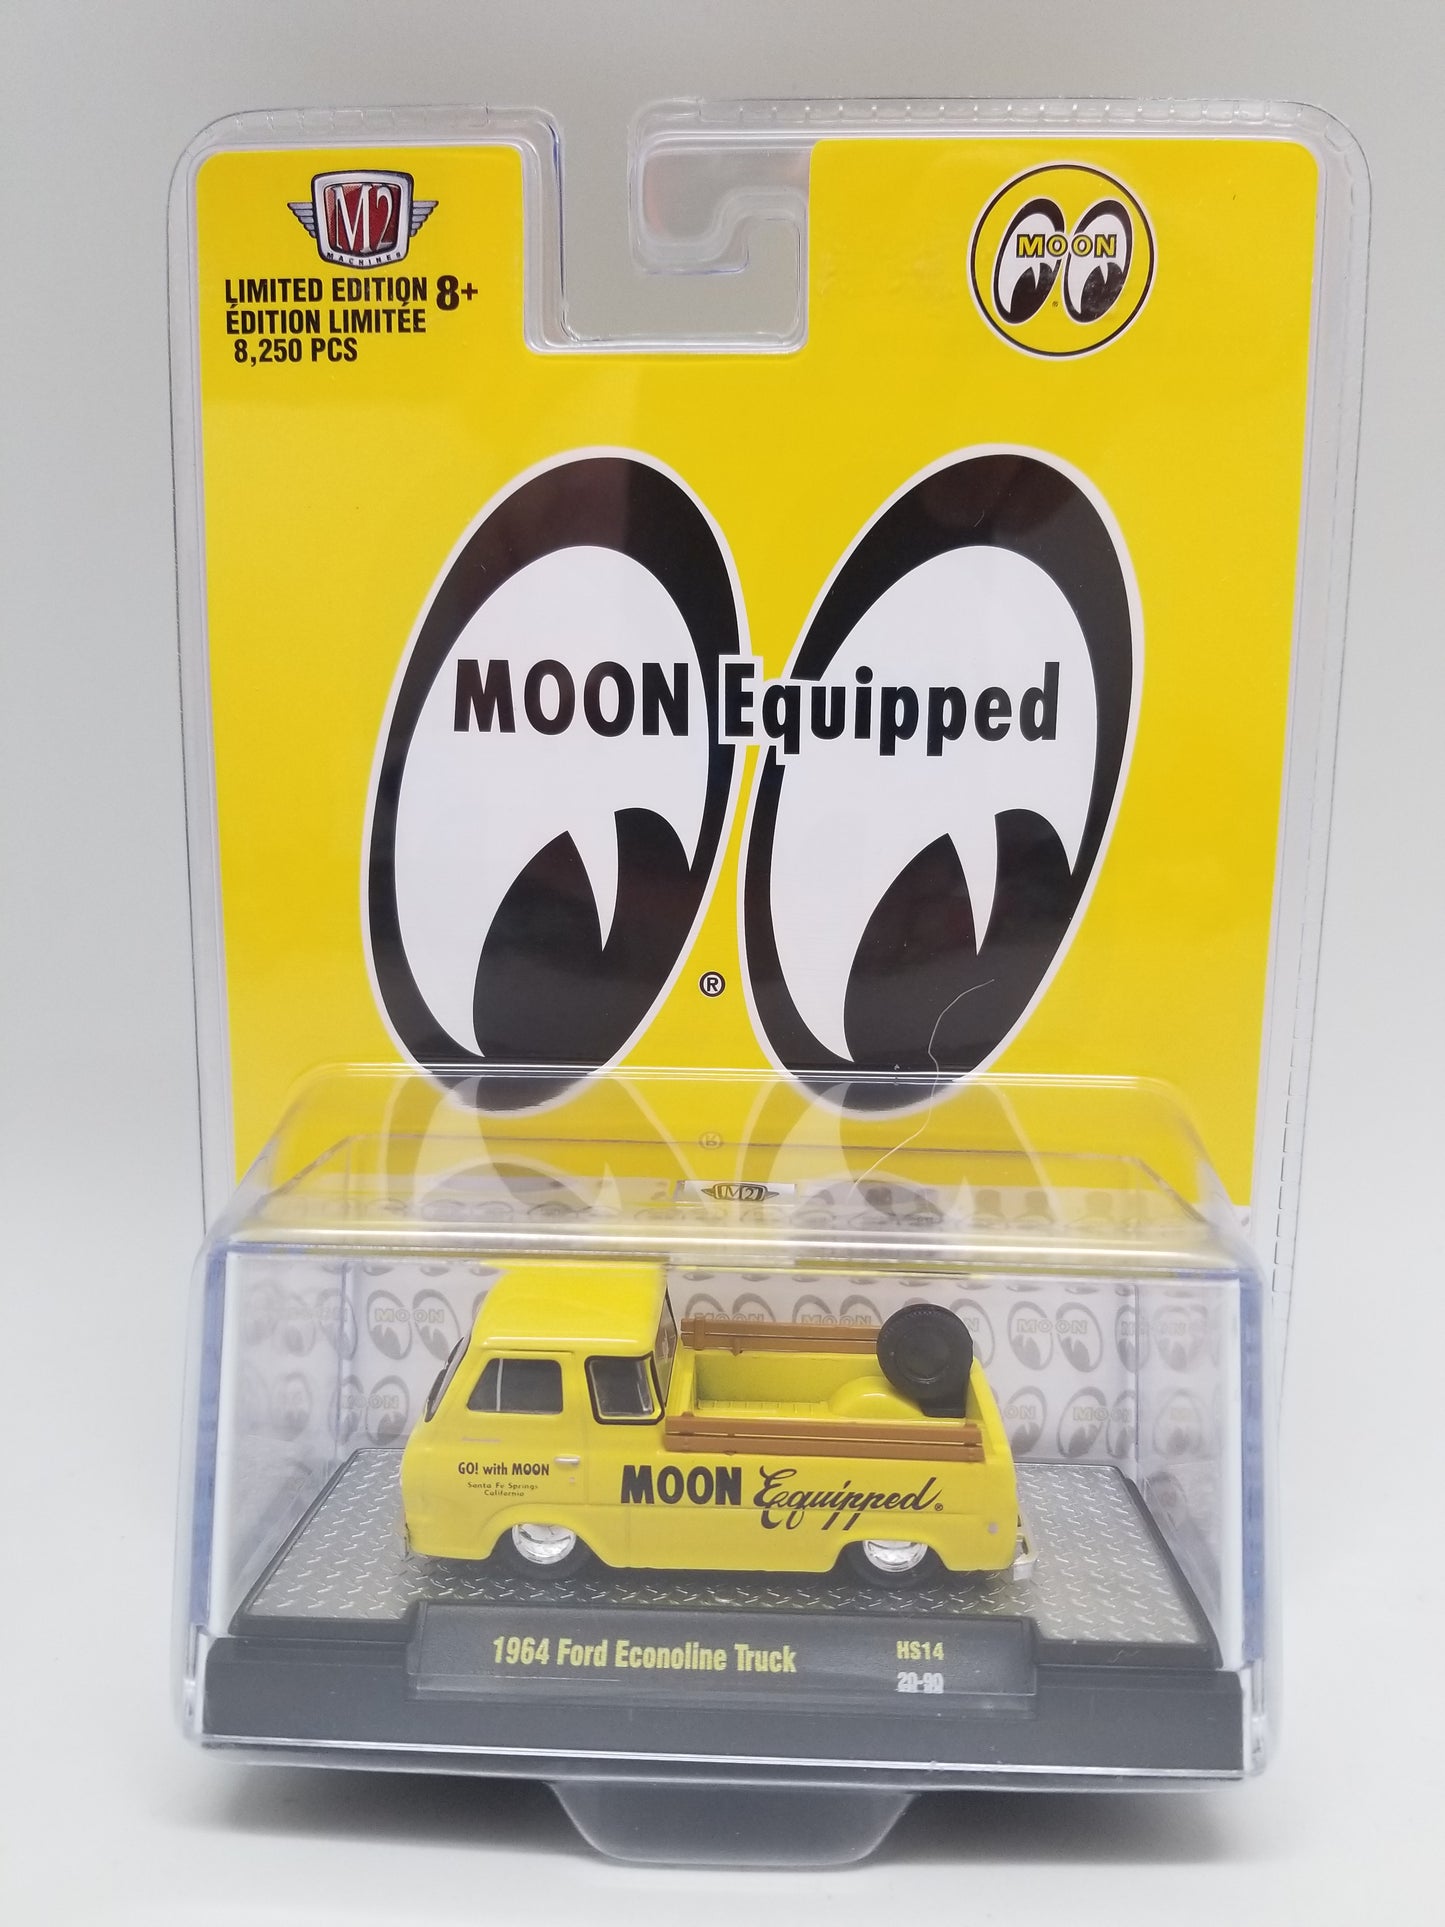 M2 1964 Ford Econoline Truck - Moon Equipped